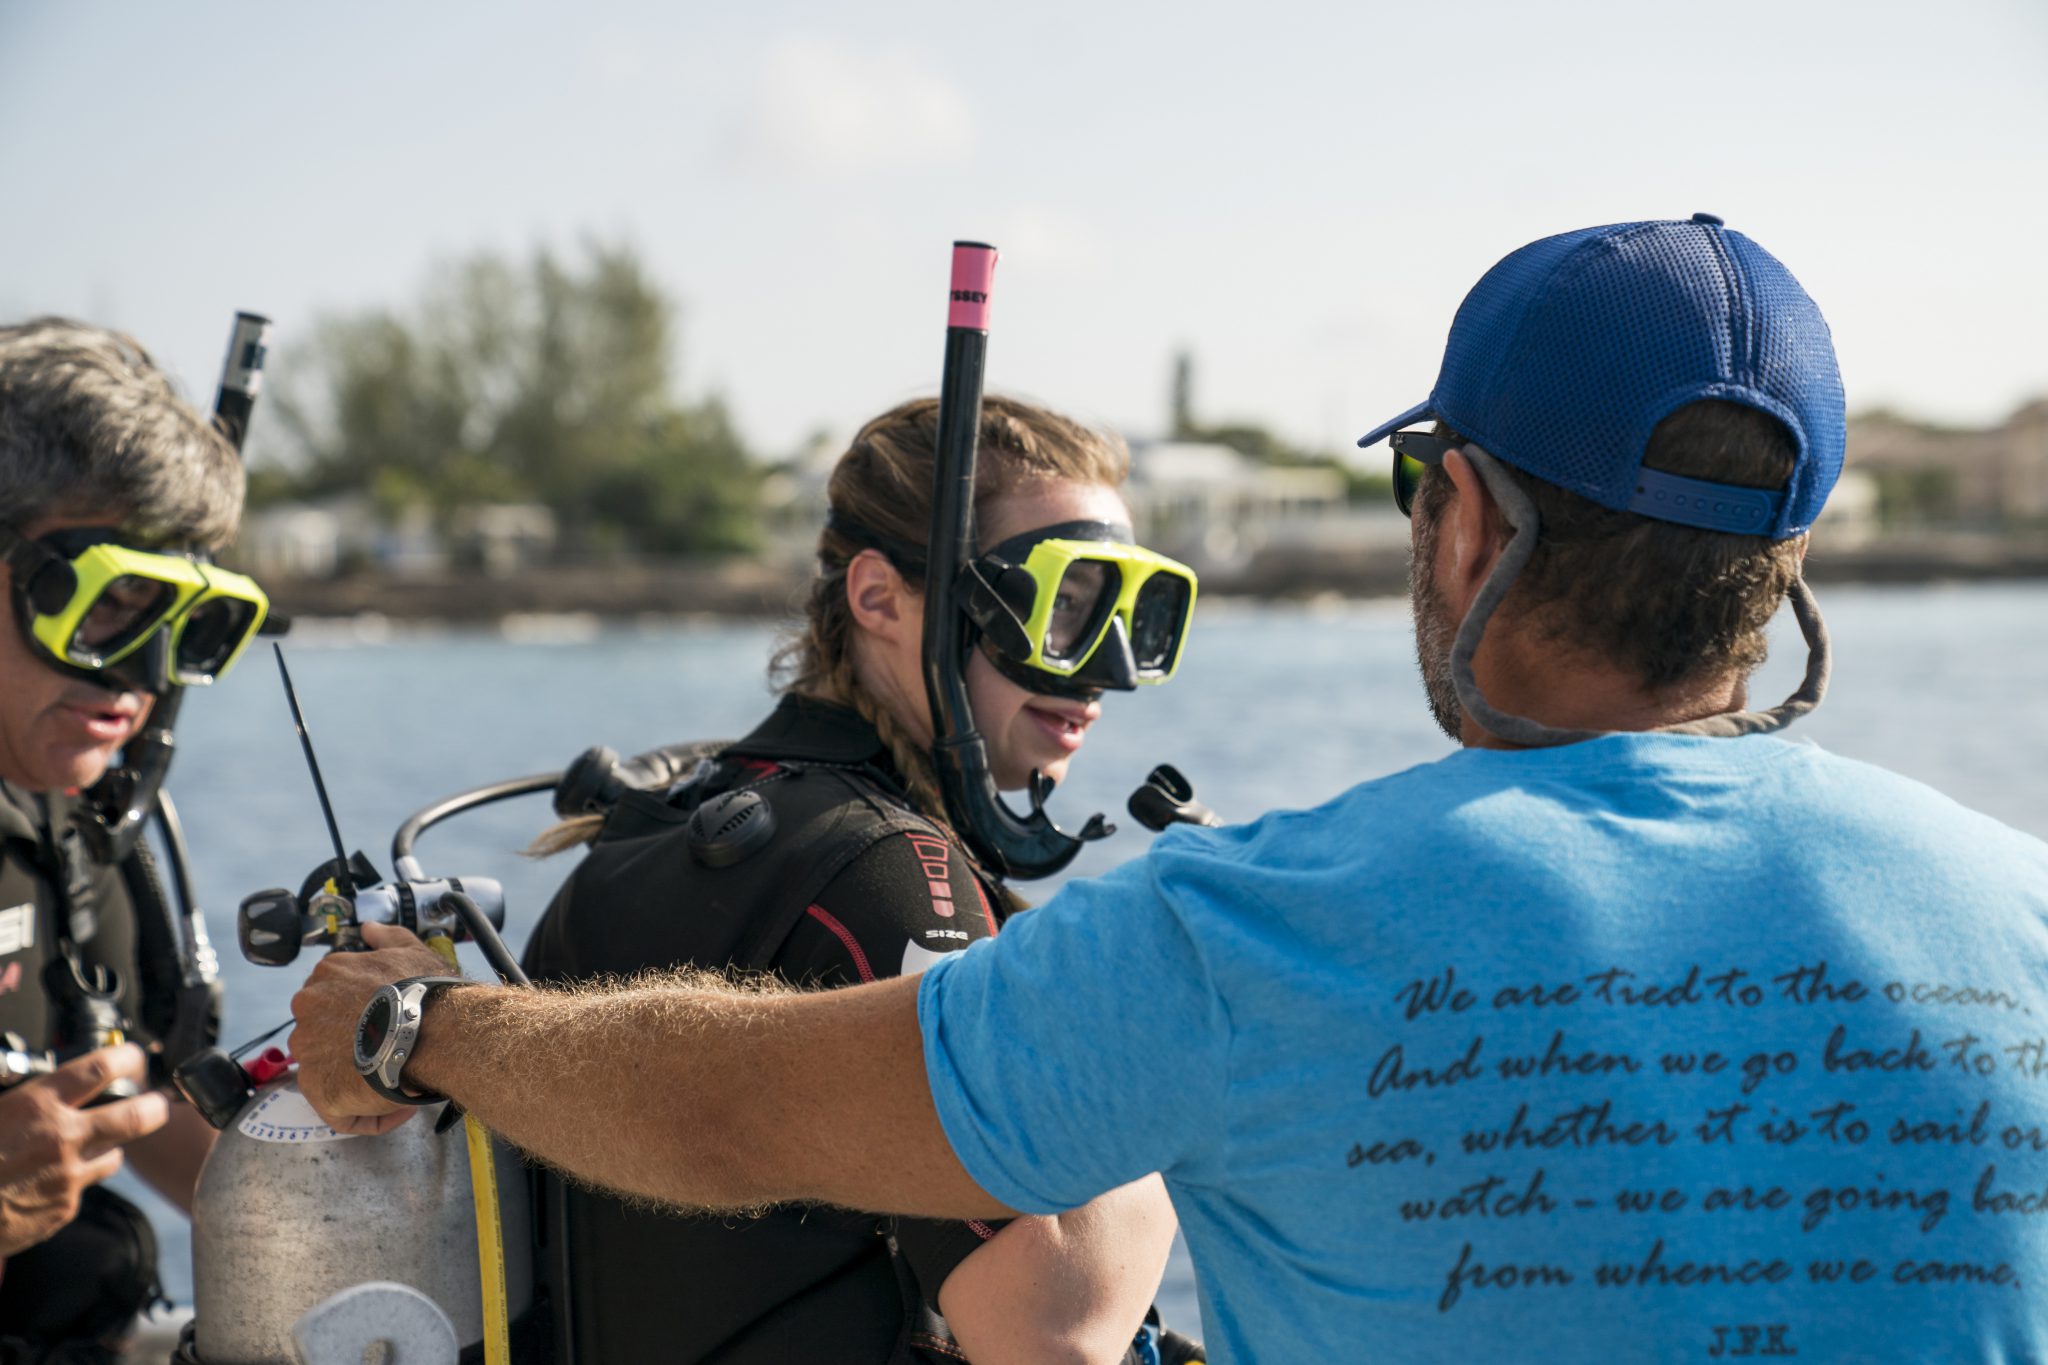 A PADI Pro reassuring a student during their scuba diving course, one of many roles in the life of a PADI Divemaster